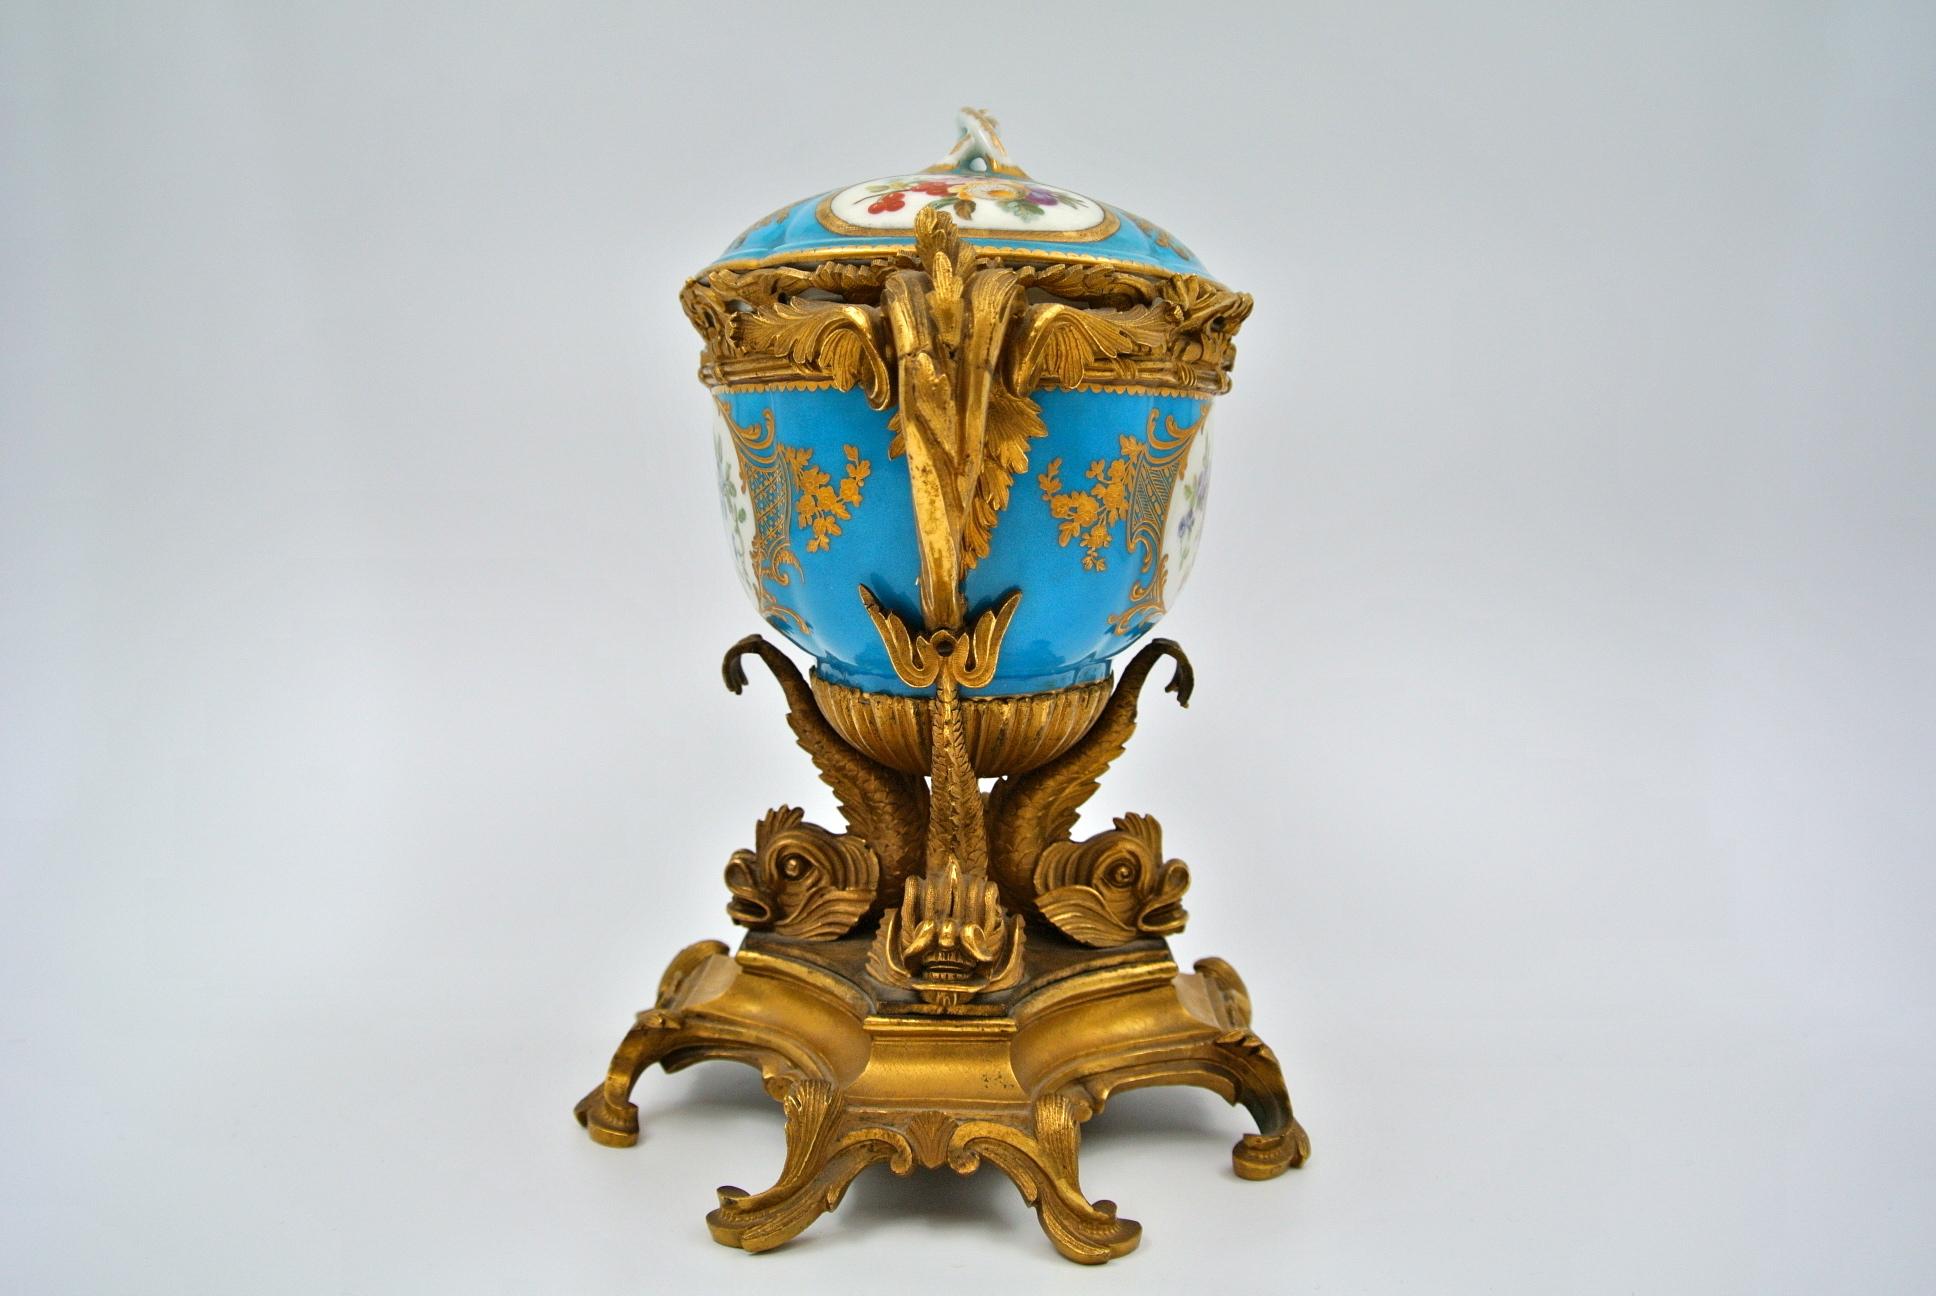 Napoleon III Covered Cup in Chiselled and Gilded Bronze and Painted Sèvres Porcelain